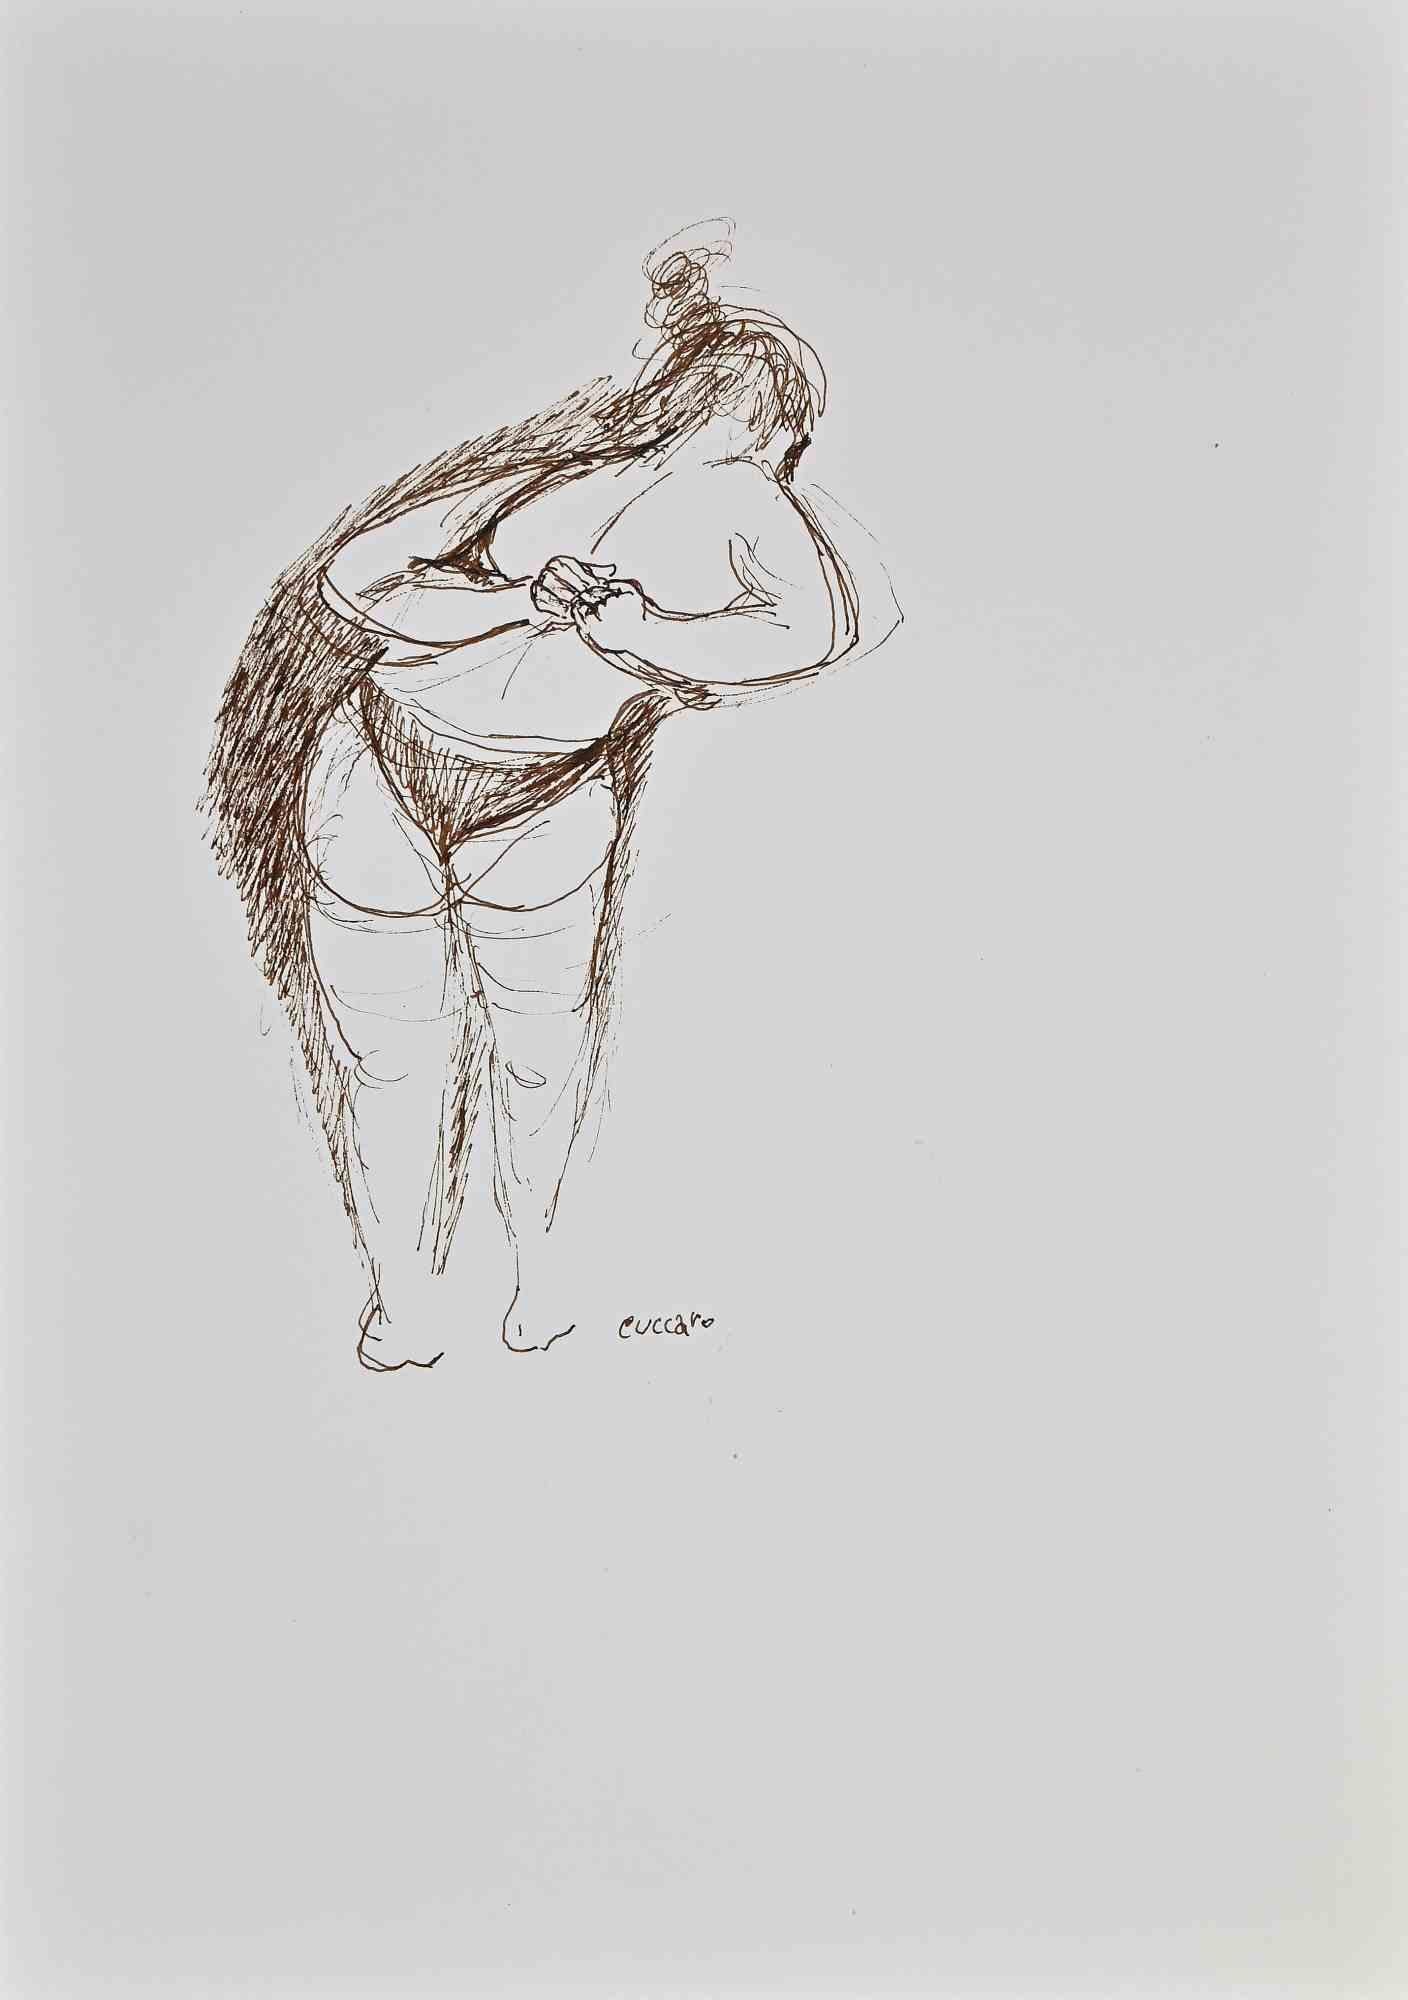 Woman Dessing Up 2 is an original Contemporary Artwork realized in the 21st Century by Roberto Cuccaro. 

Original China Ink on Paper.

Hand-signed on the lower right corner: Cuccaro.

Total dimensions: 29.7 x 21 cm.

Mint Conditions.

Roberto